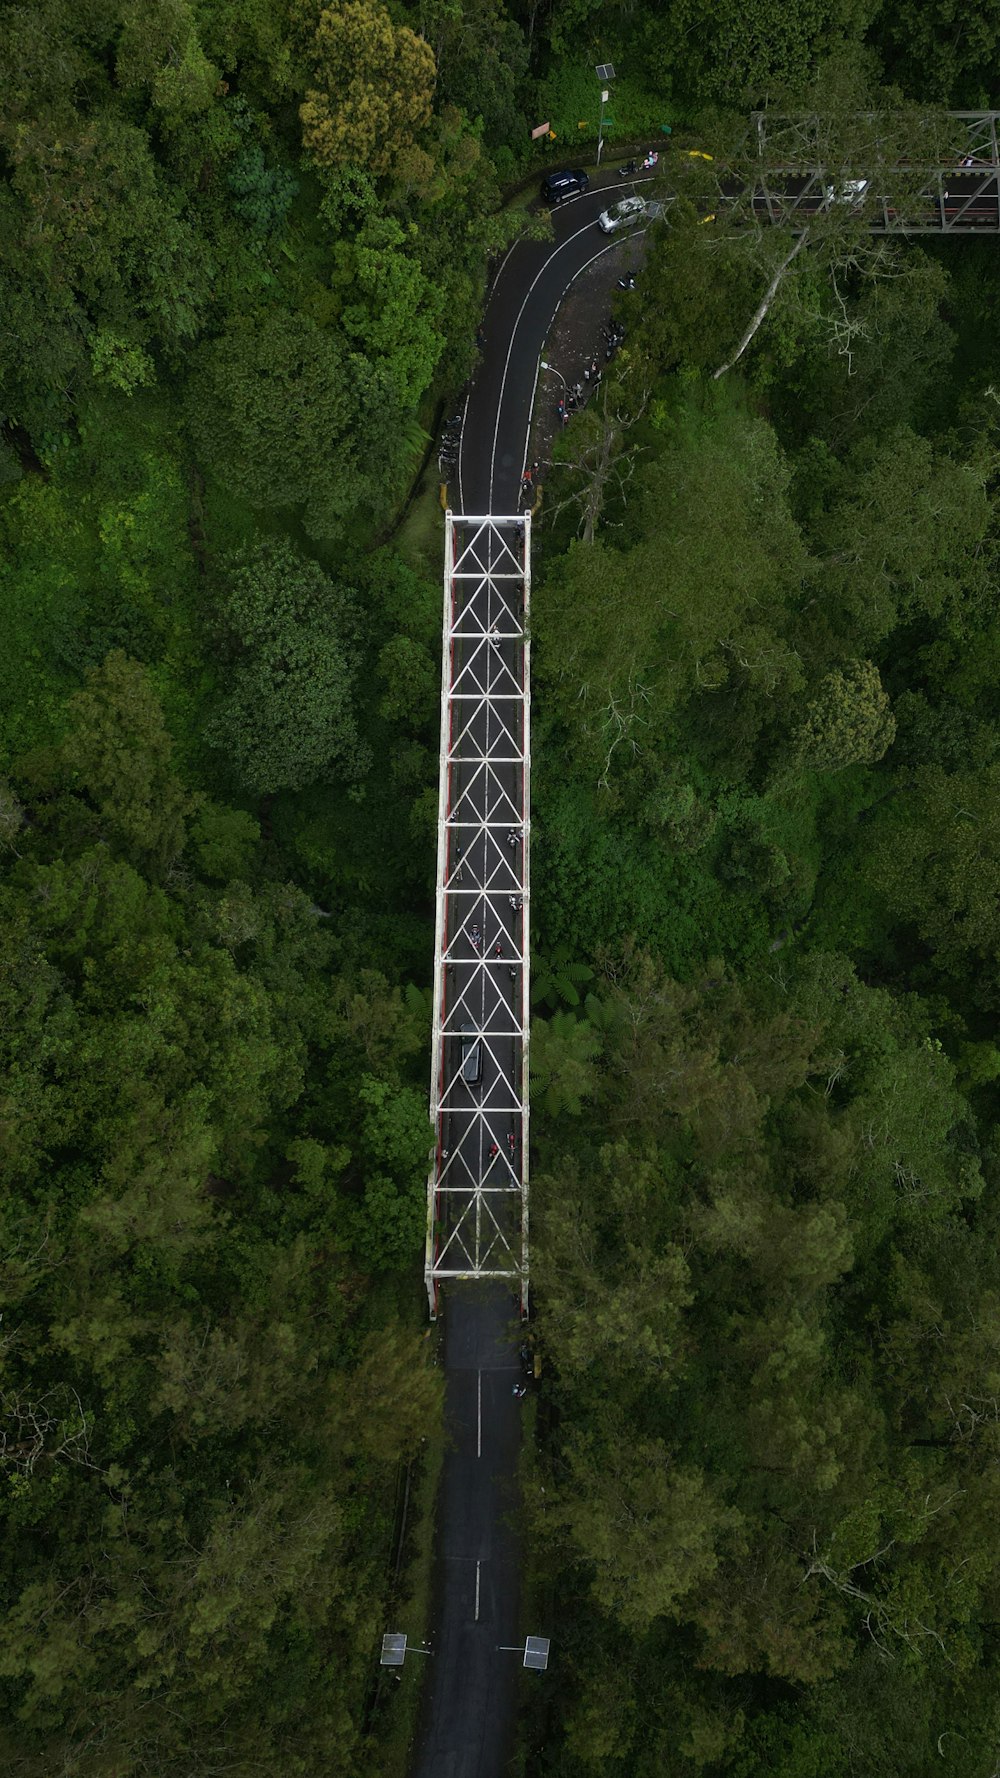 an overhead view of a bridge in the middle of a forest